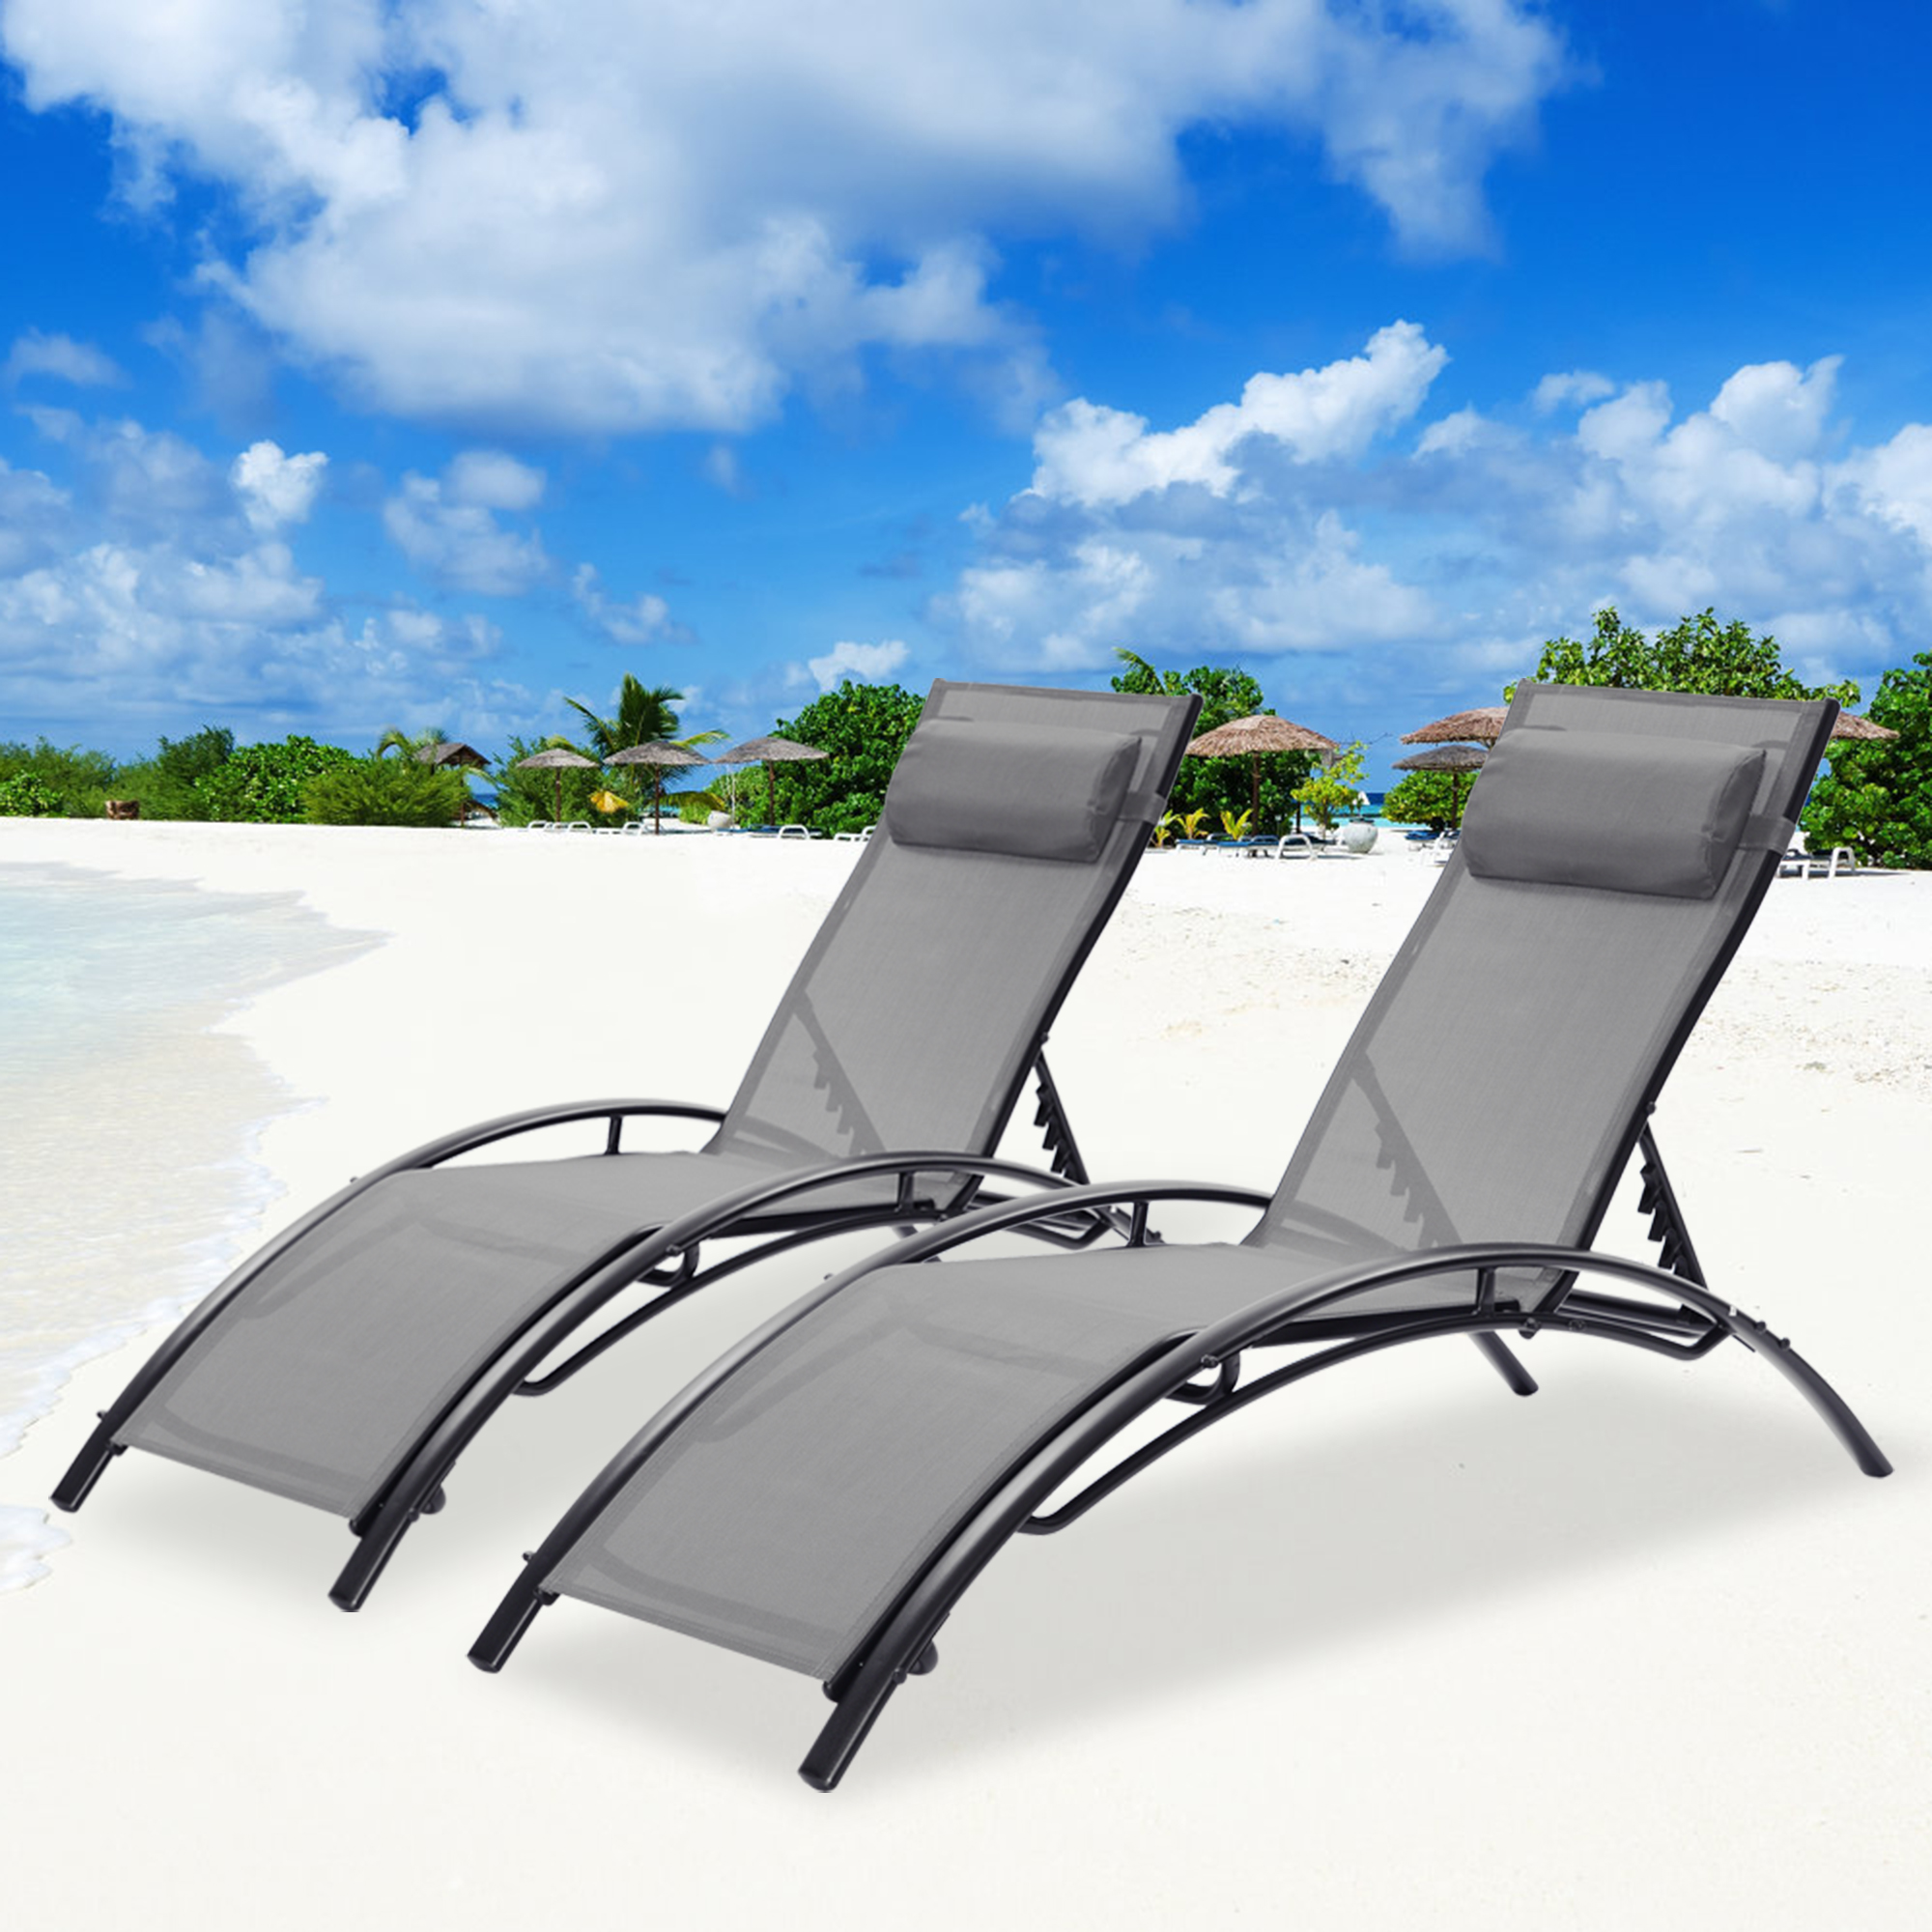 2 PCS Set Chaise Lounge Outdoor Lounge Chair Lounger Recliner Chair For Patio Lawn Beach Pool Side Sunbathing-Boyel Living